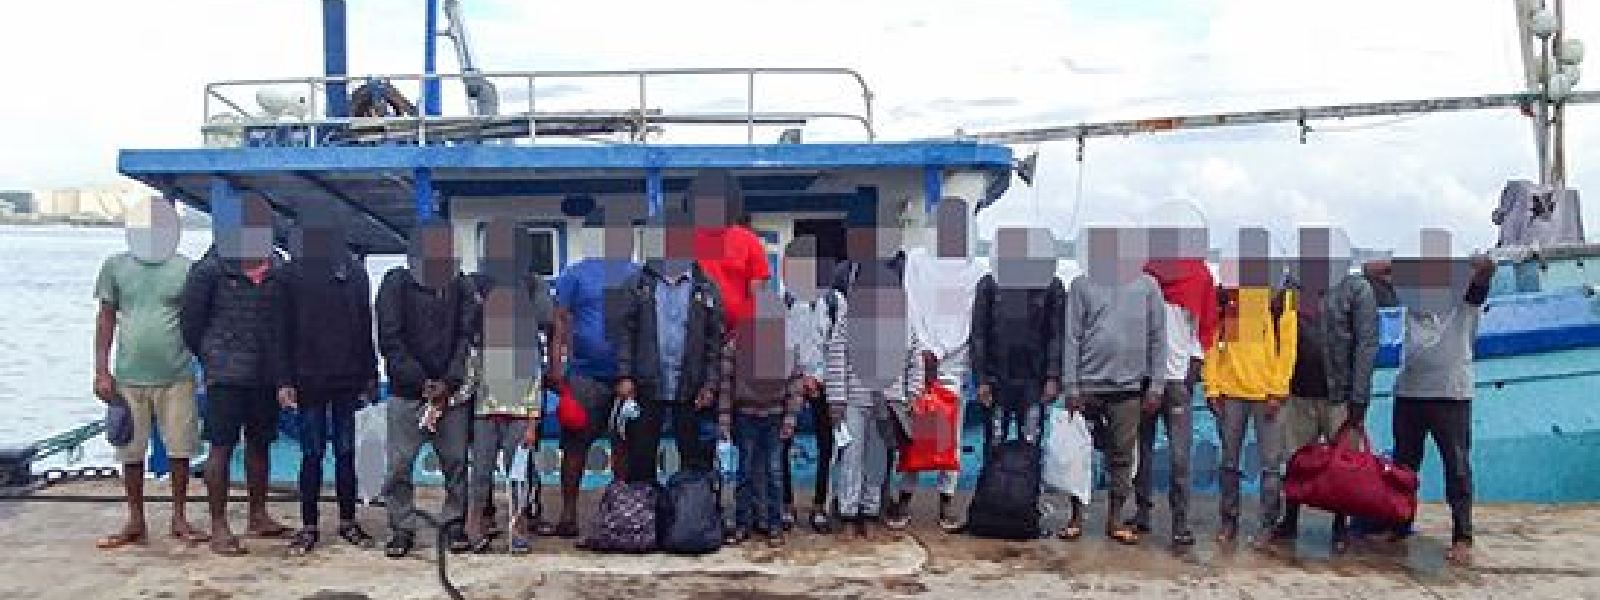 Navy detains 20 people for illegal migration attem